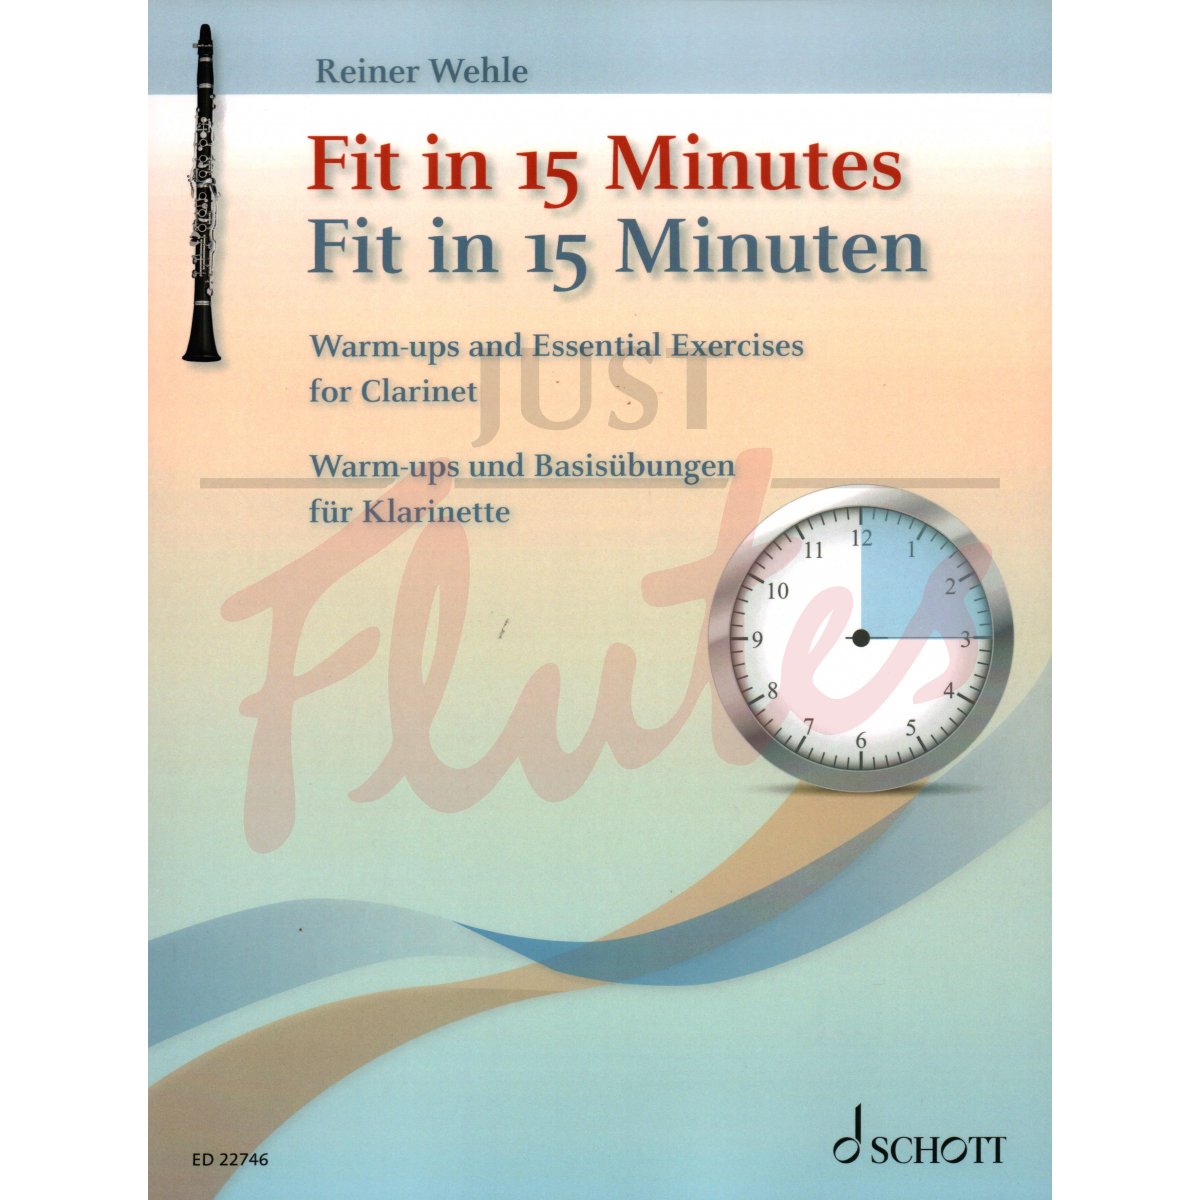 Fit in 15 Minutes for Clarinet